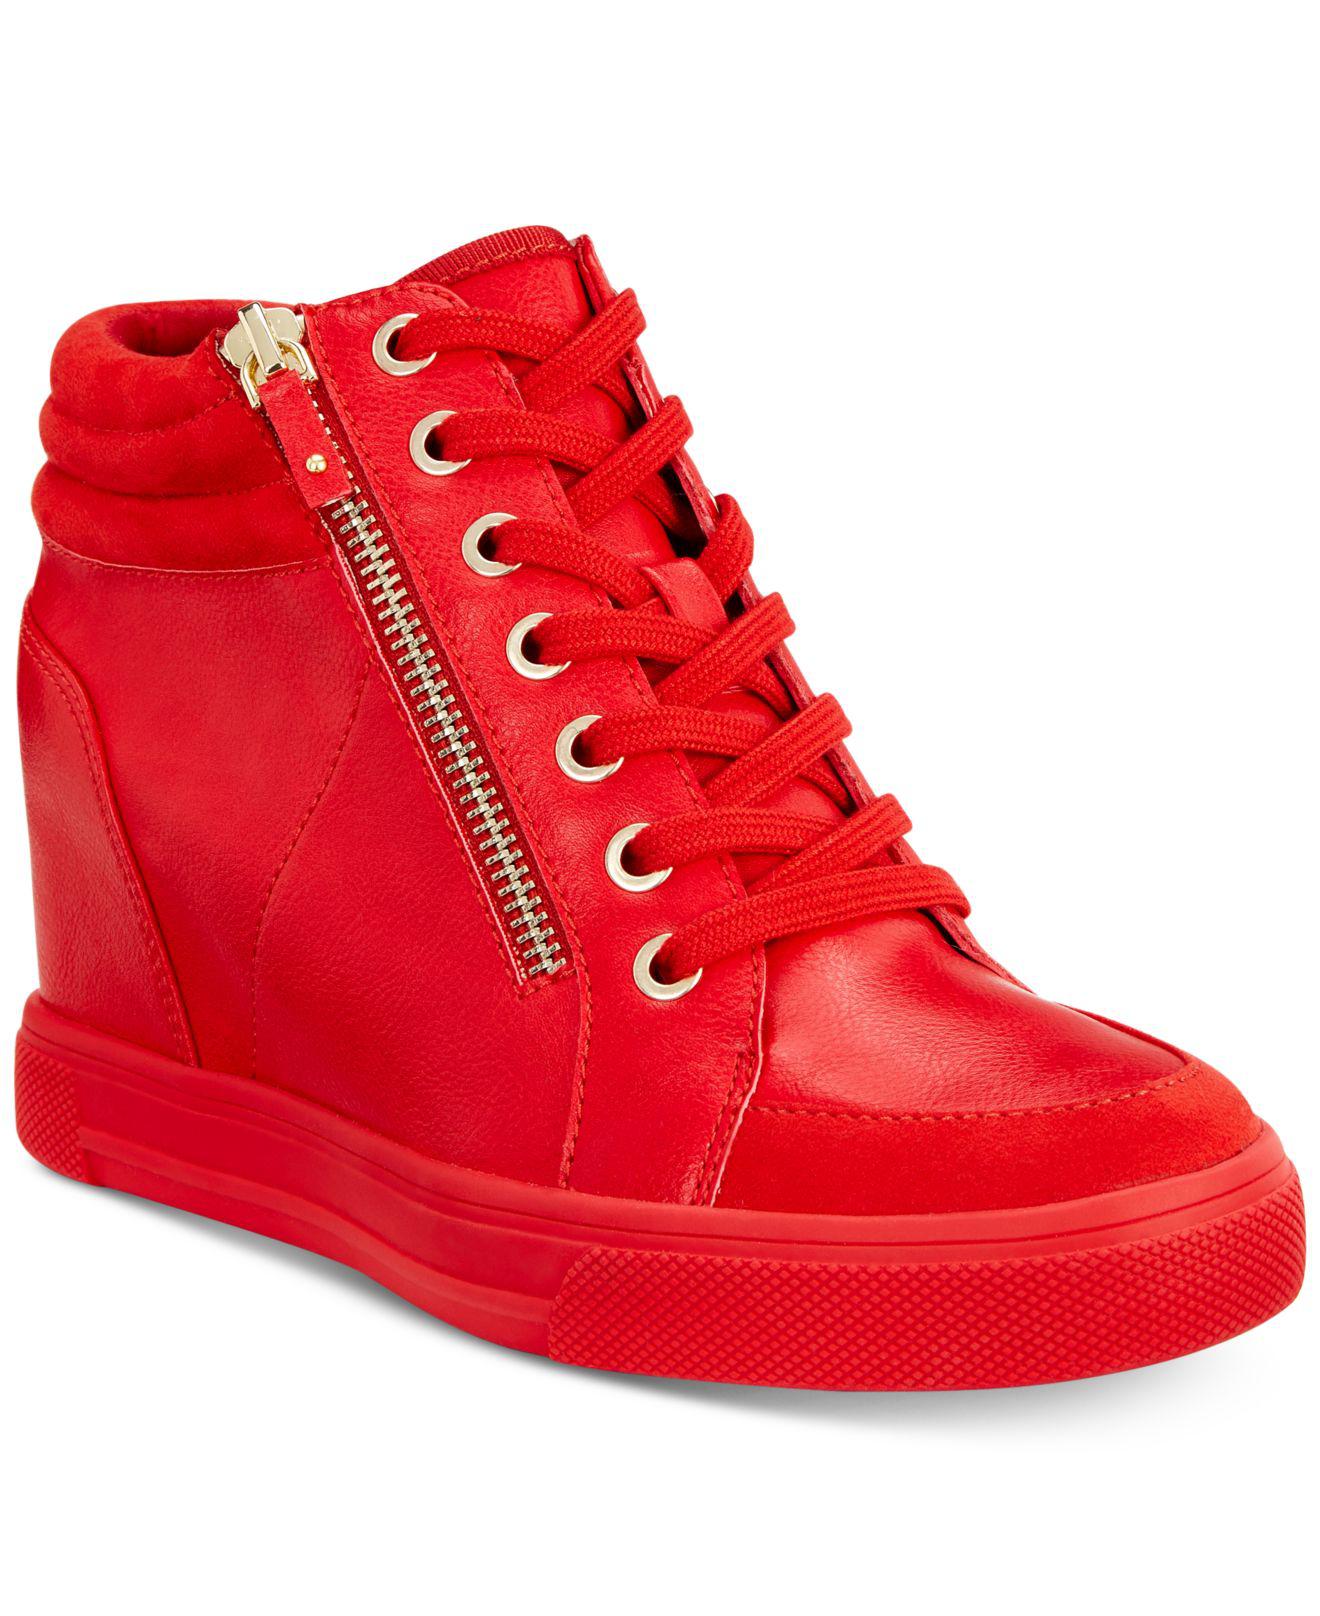 Juicy Couture Women's Jiggle Embellished Lace-Up Wedge Sneakers |  CoolSprings Galleria